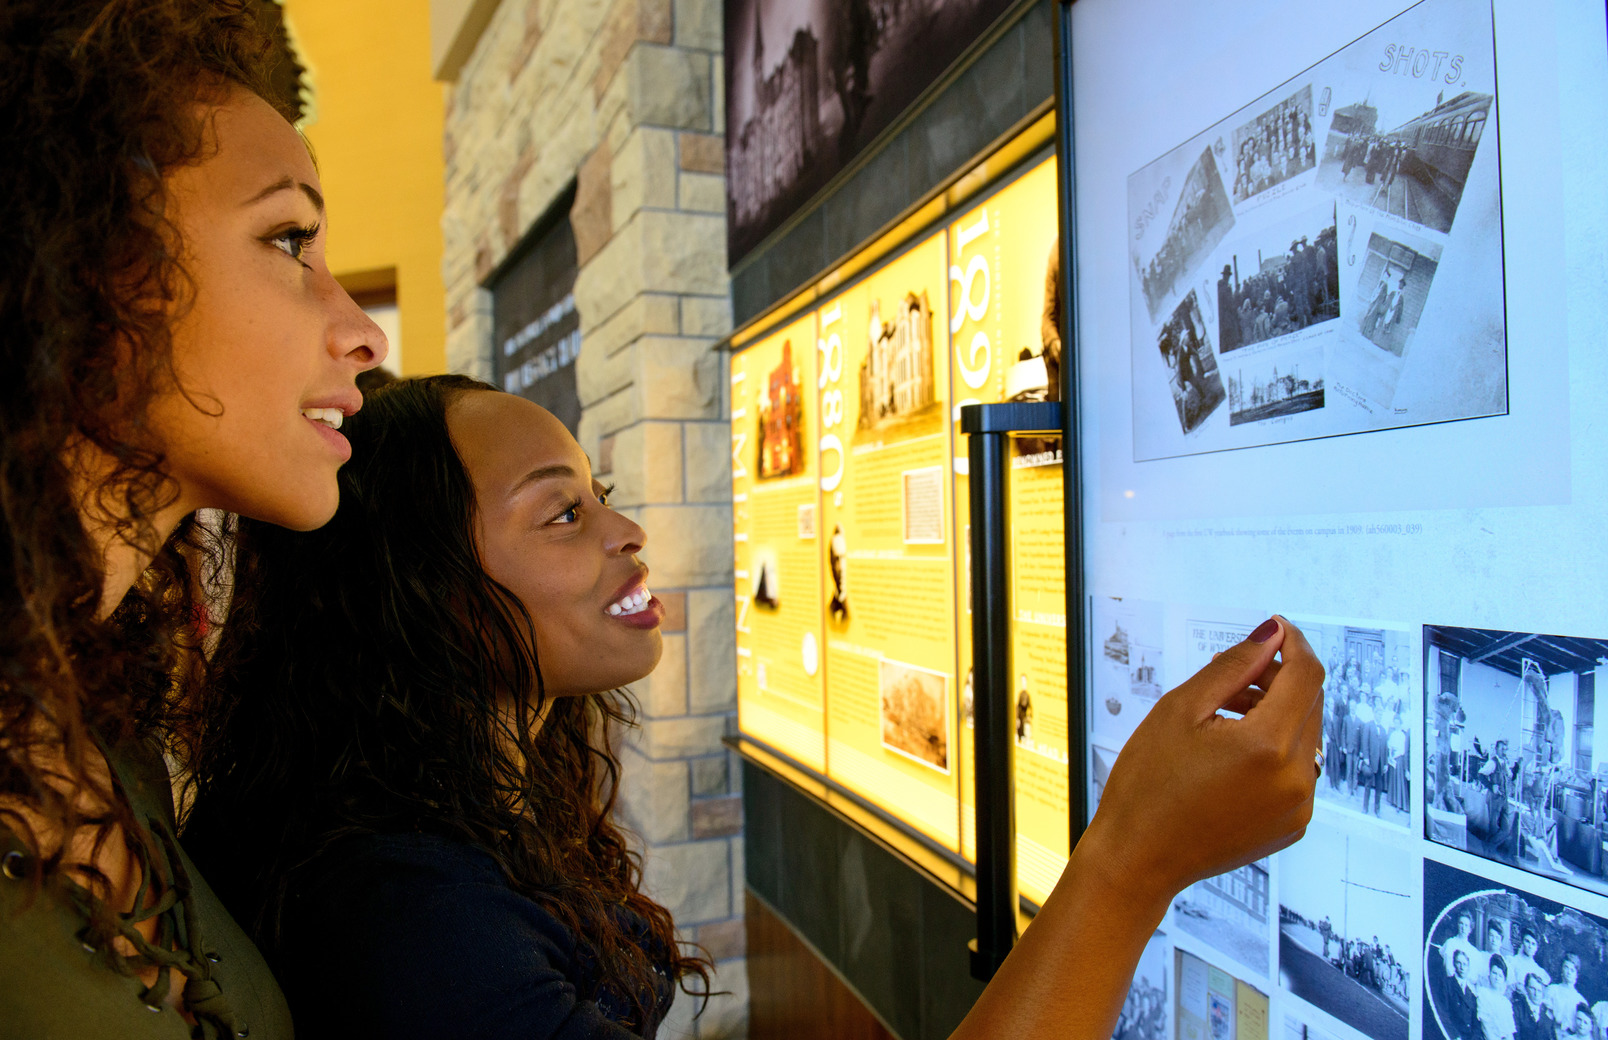 People looking at historical images in an exhibit